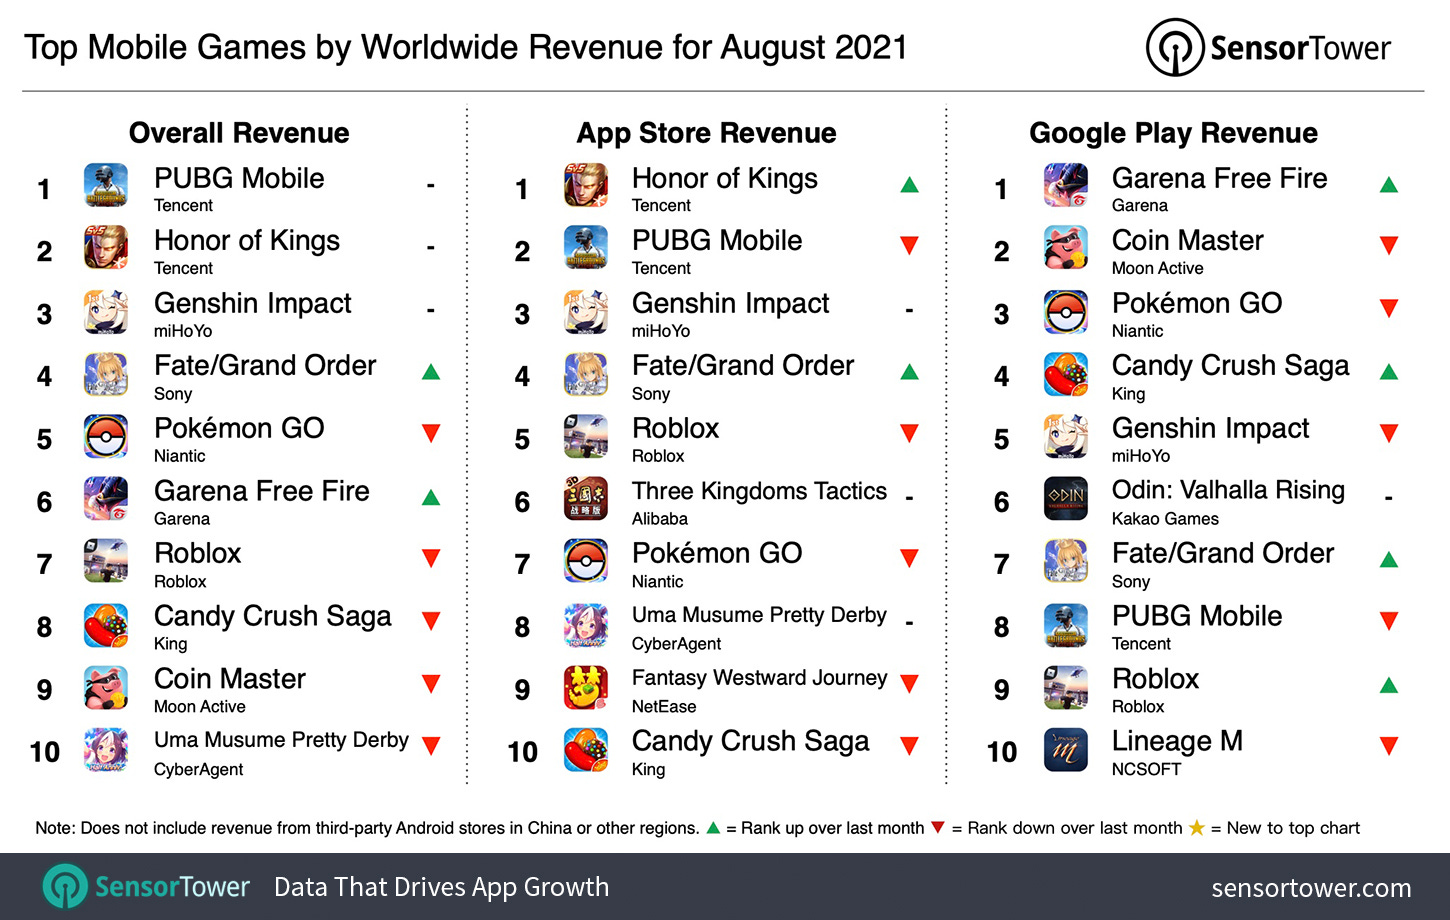 Top Grossing Mobile Games Worldwide for August 2021